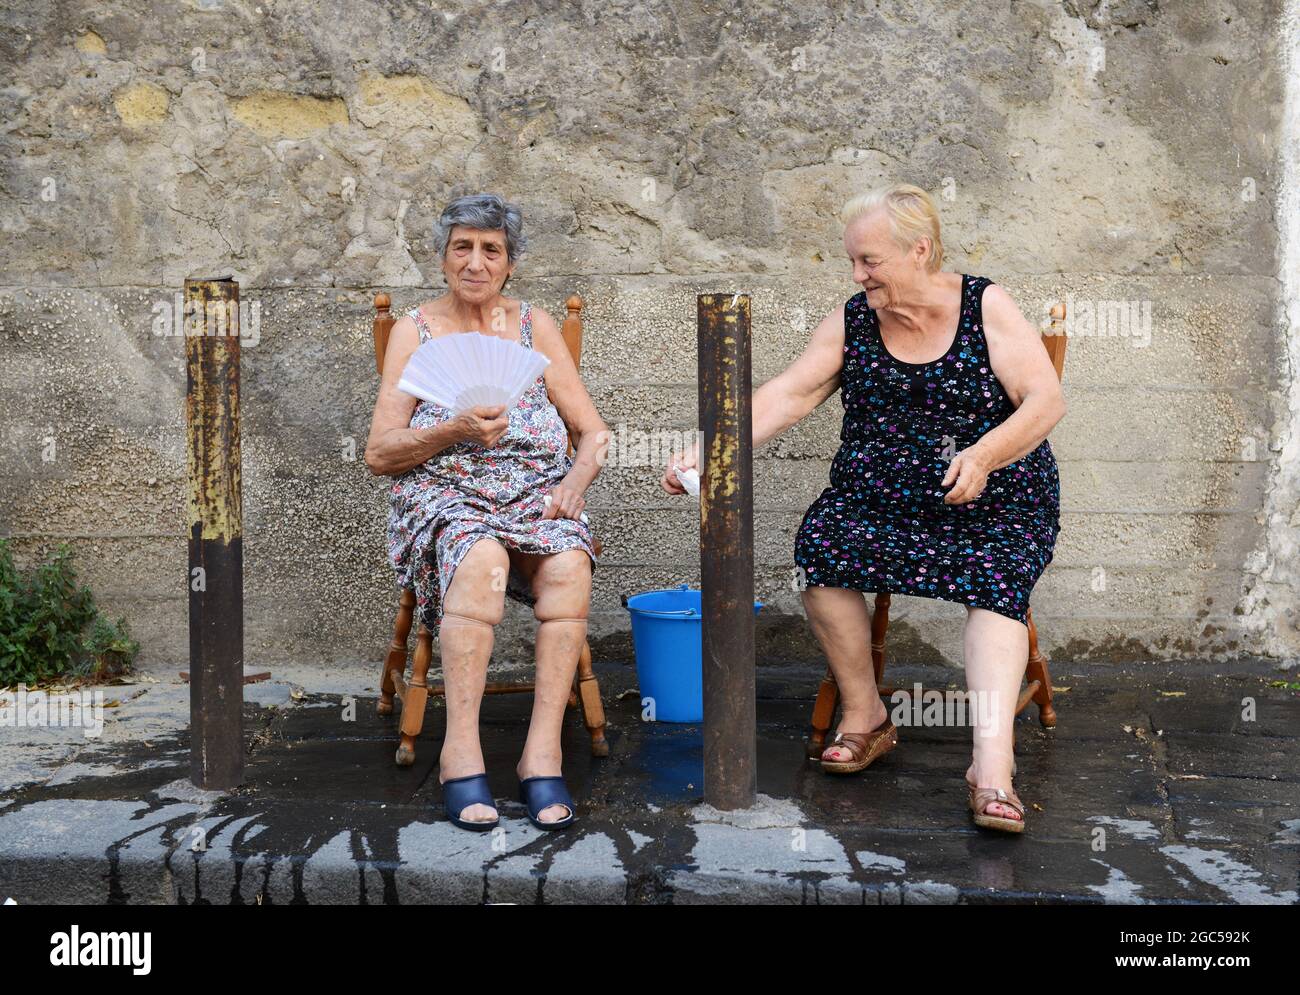 July 2015, Naples Italy. Elderly Italian women sitting outside on the street with a bucket of water to help with the scorching heat. Stock Photo